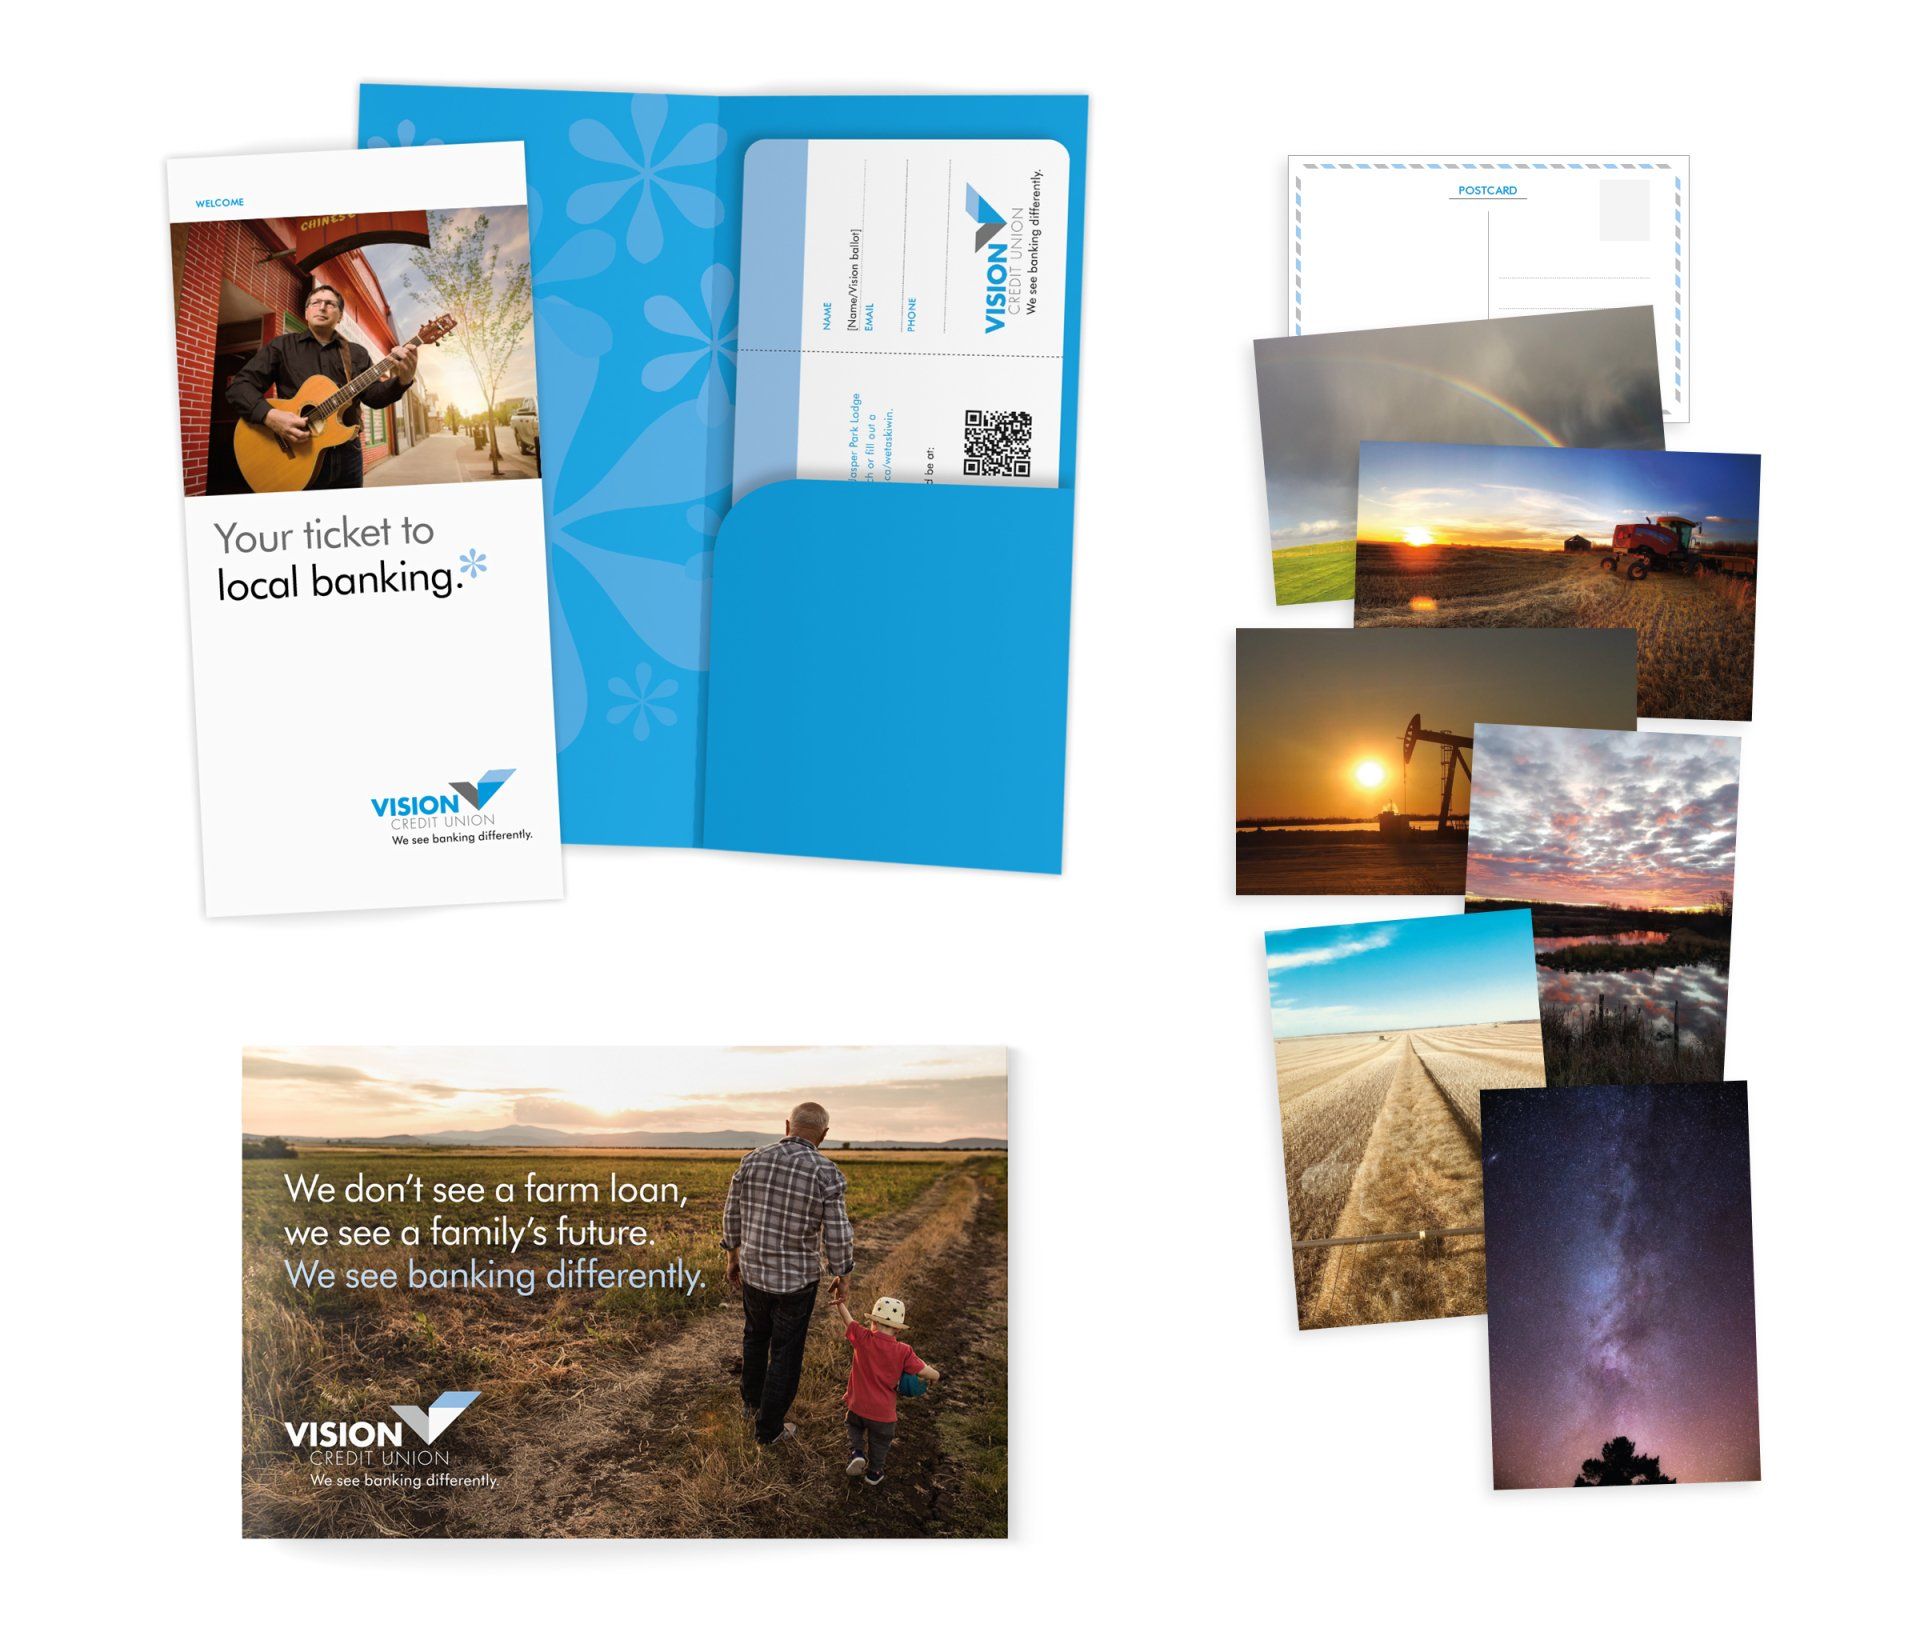 BROCHURE AND SERIES OF POSTCARDS THAT ARE PART OF DIRECT MAIL CAMPAIGN FOR VISION CREDIT UNION